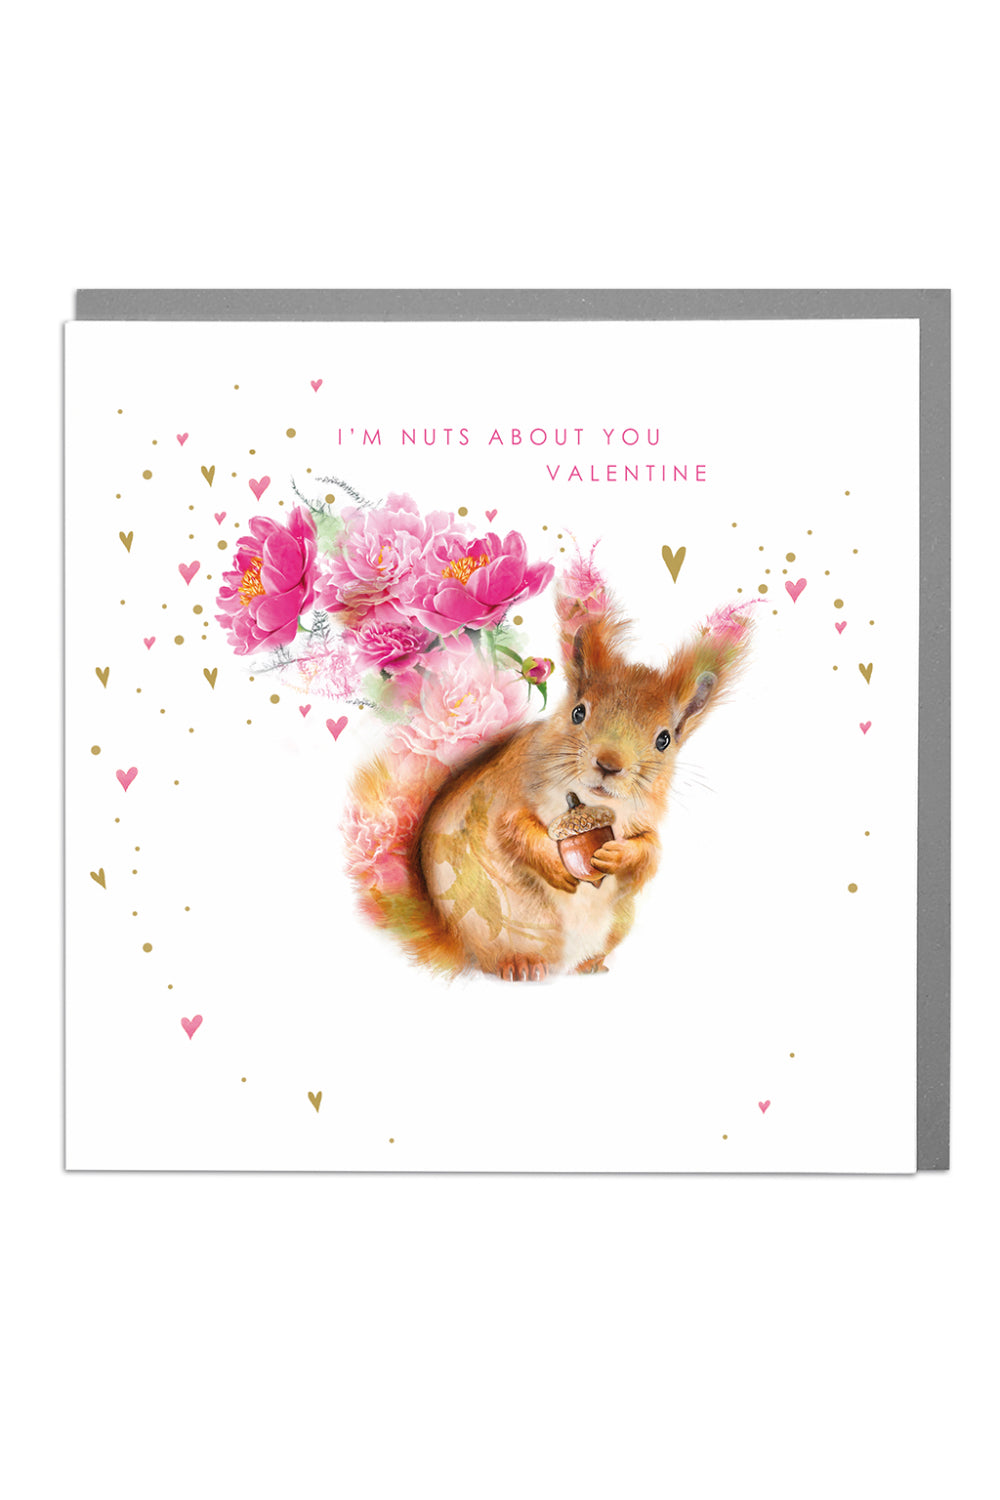 I'm Nuts About You Squirrel Valentine Card by penny black